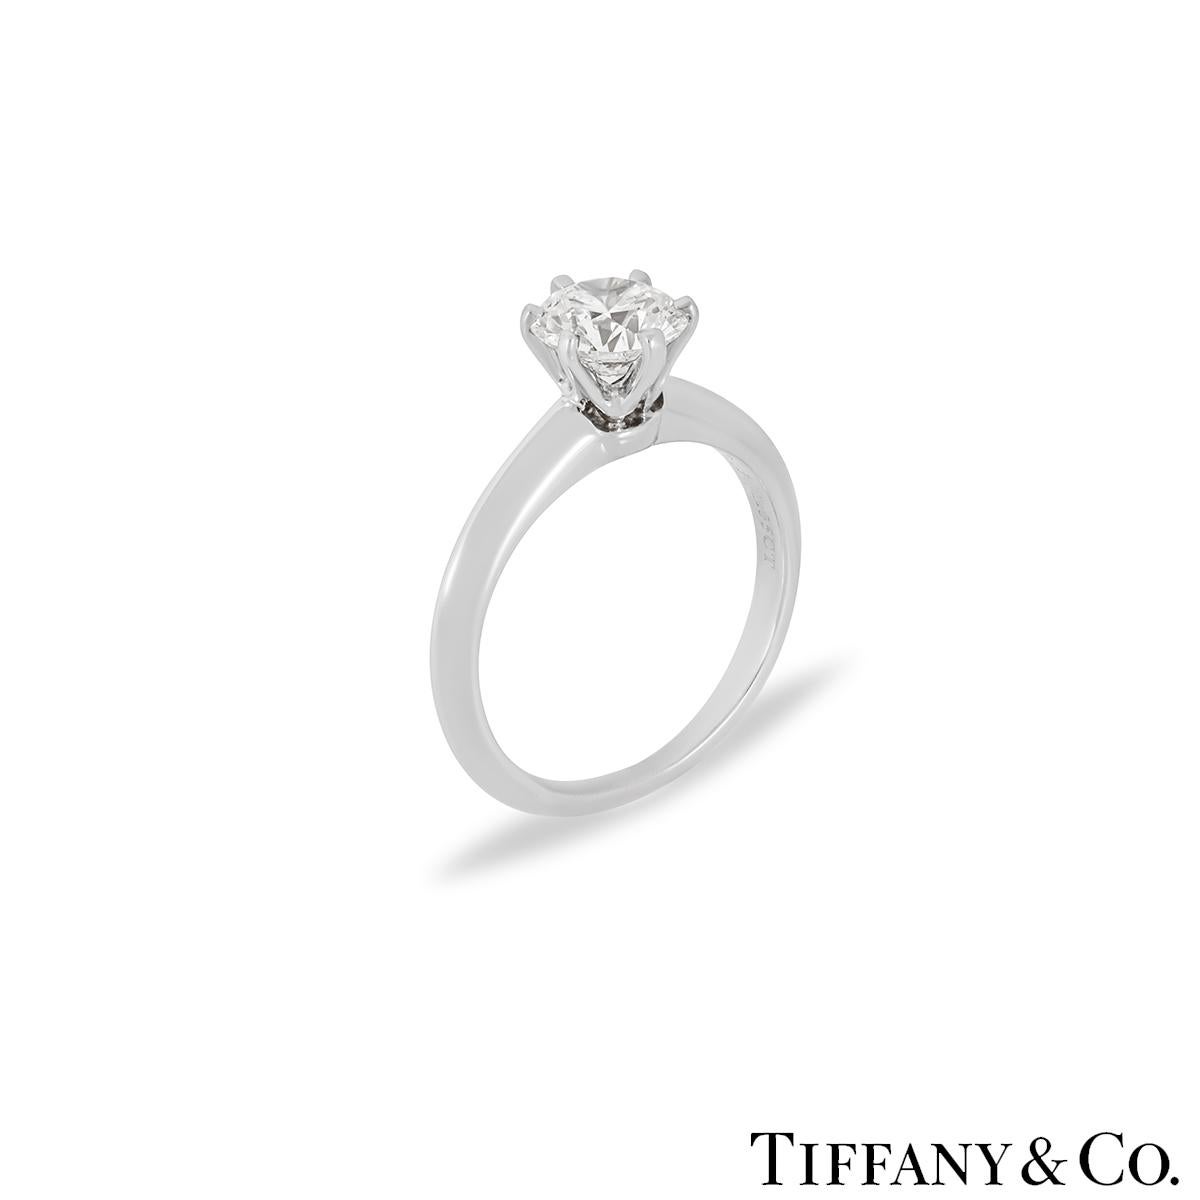 A stunning diamond ring in platinum by Tiffany & Co. The ring is set to the centre with a 1.05ct round brilliant cut diamond in a classic setting. The diamond is H colour and VS2 in clarity. The ring is currently a size J but can be adjusted for a